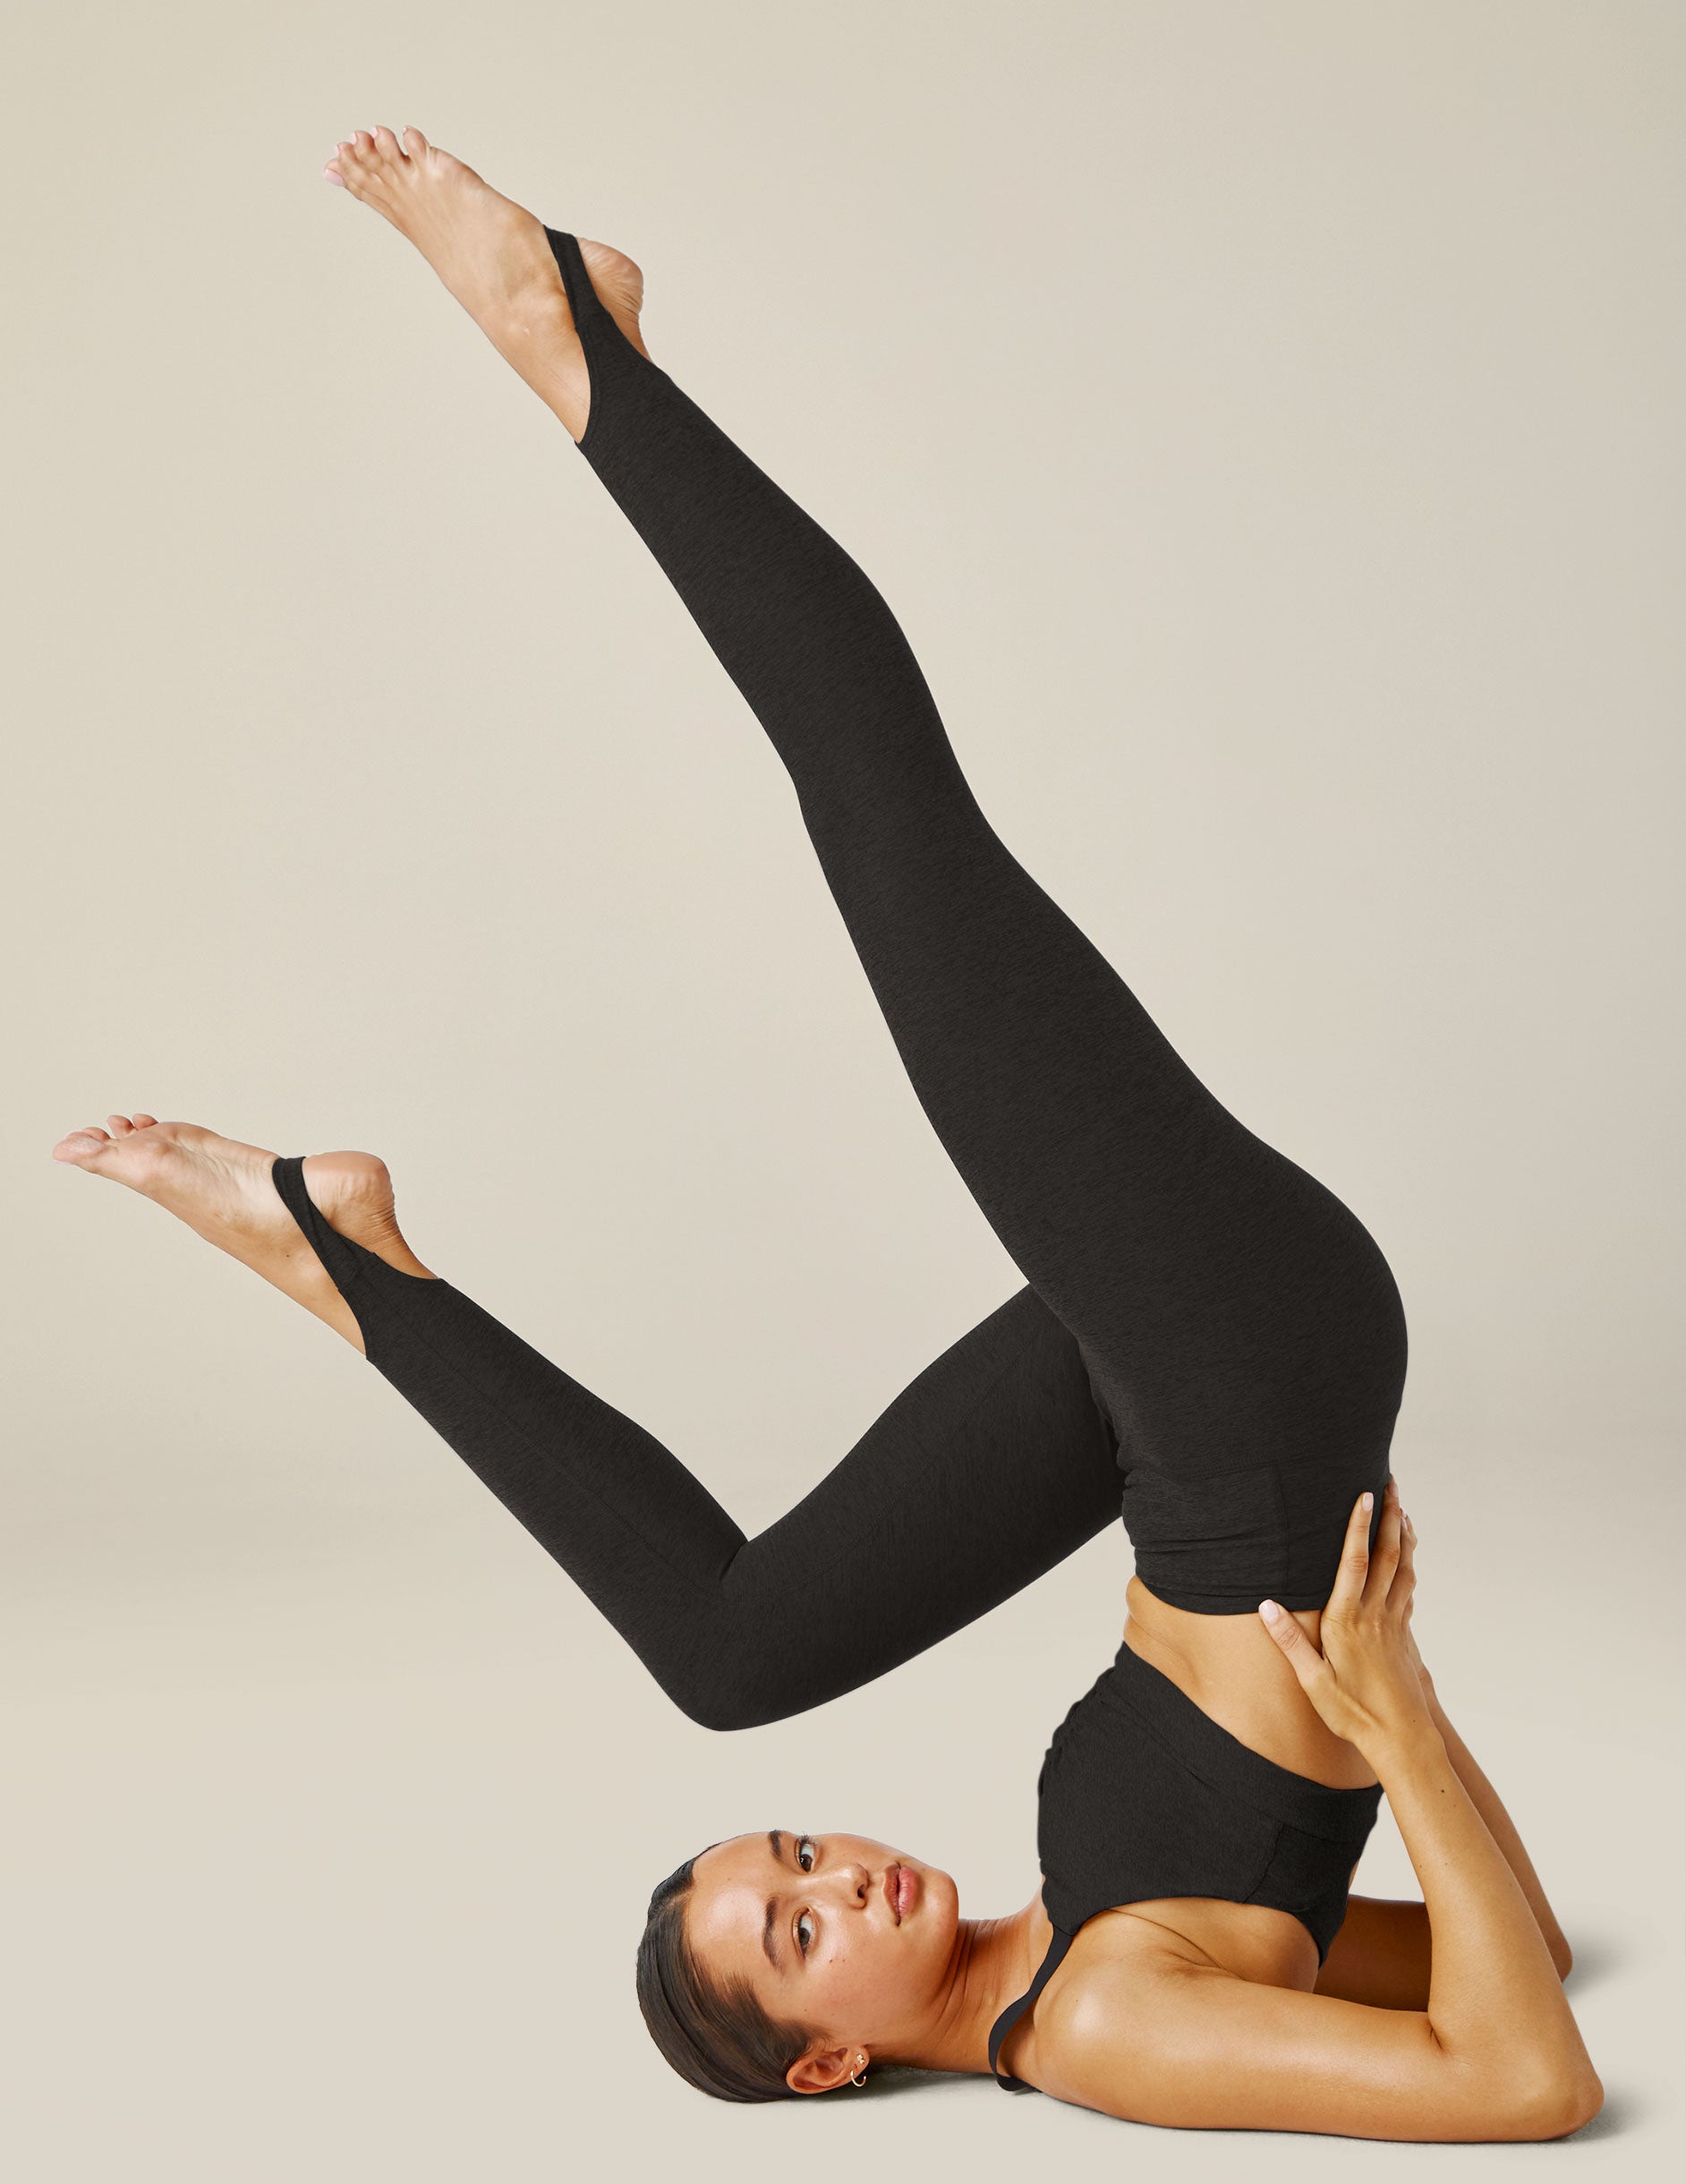 Beyond Yoga - The Beyond Yoga Quilted Stirrup #Legging will make you look  stylish while keeping your feet on the mat - or pair with heels for a night  on the town!